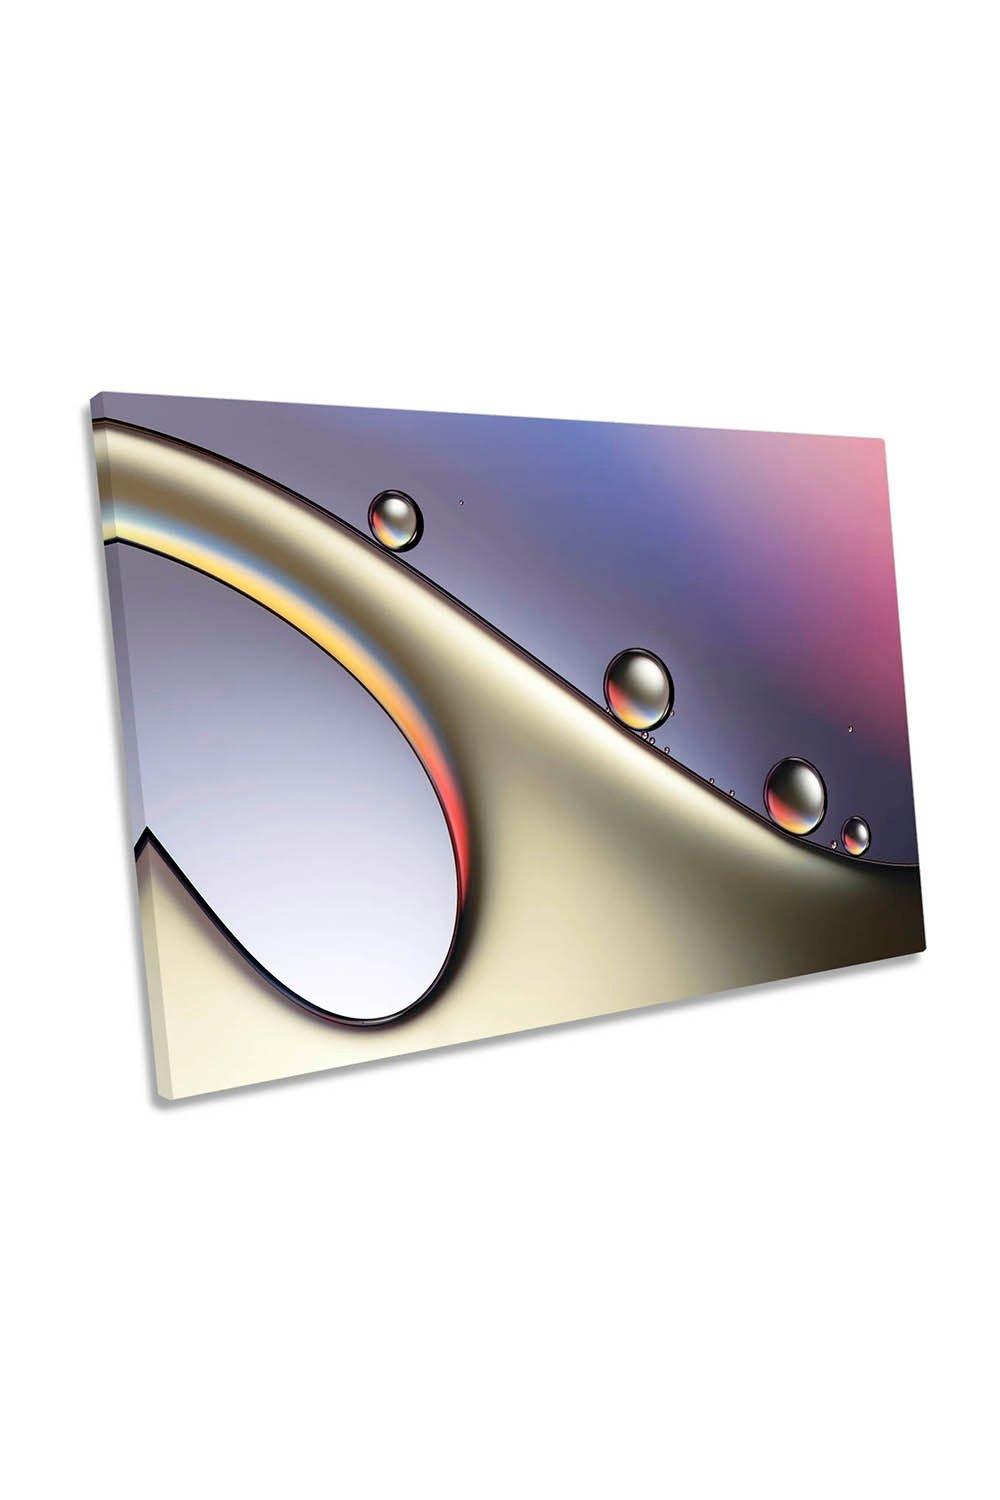 Rolling on a High Abstract Bubbles Canvas Wall Art Picture Print